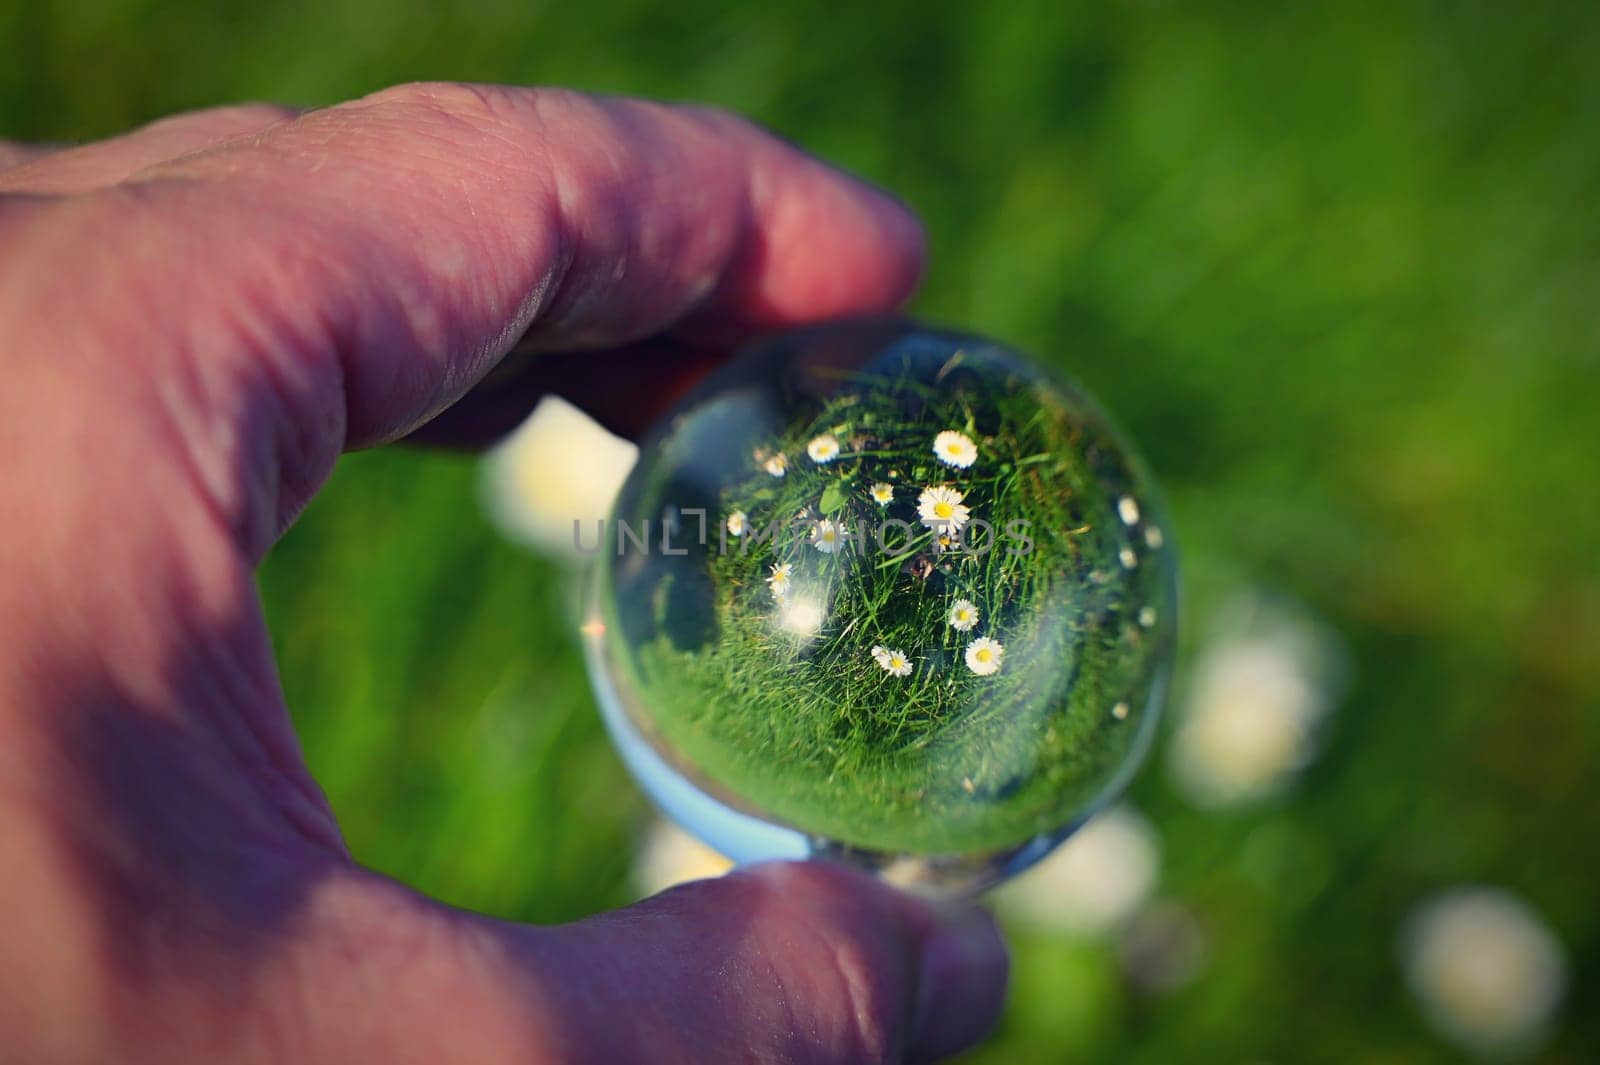 A hand with a glass ball and taking photos of the first spring flowers. Daisies - flowers. Concept for nature and spring time.